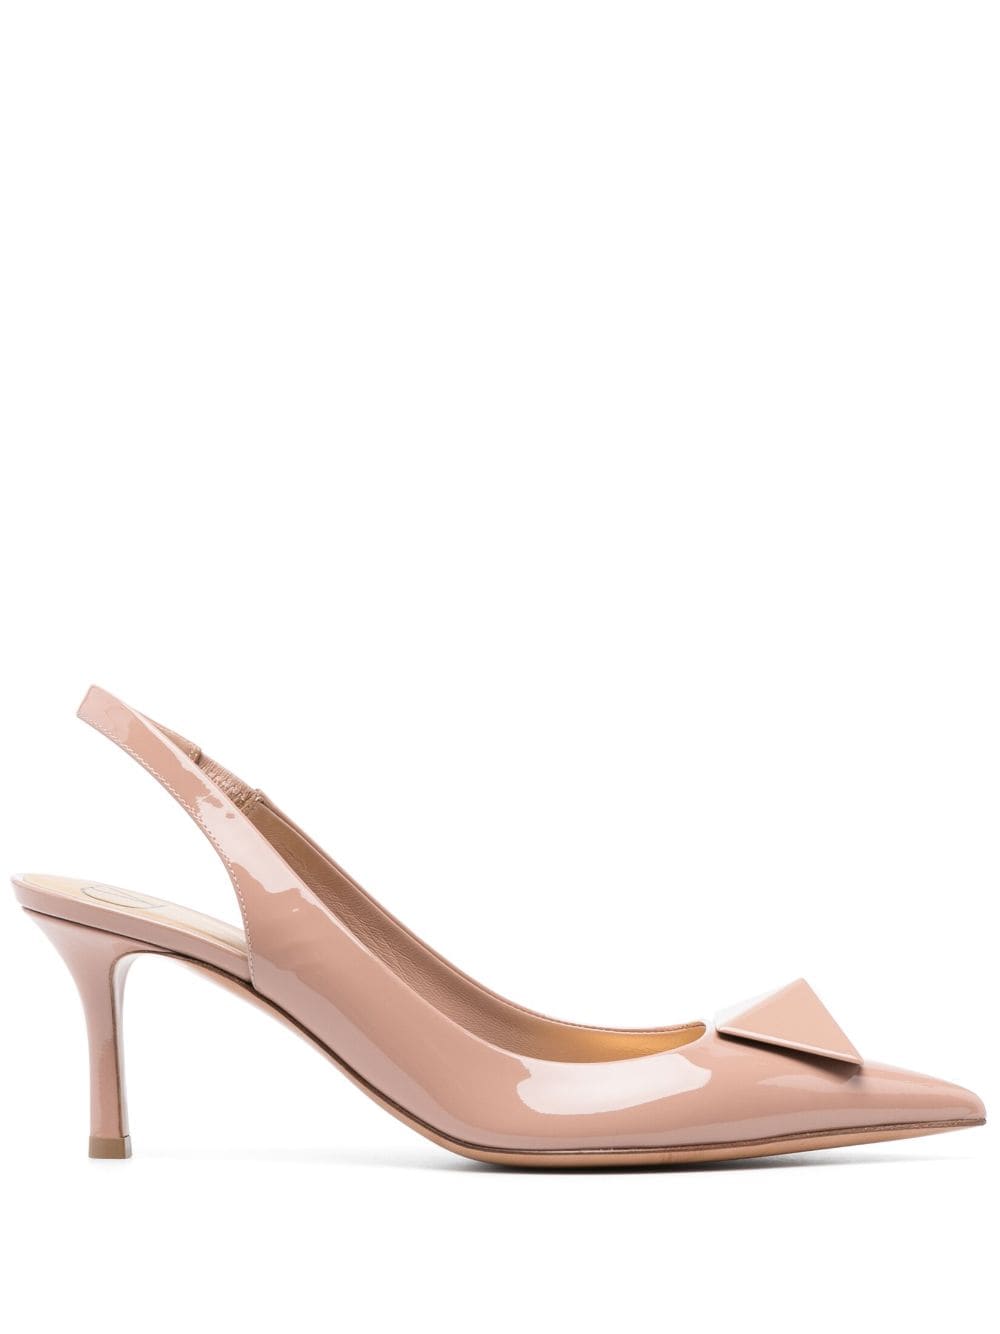 VALENTINO Women's Rosecannel Pumps - FW23 Collection